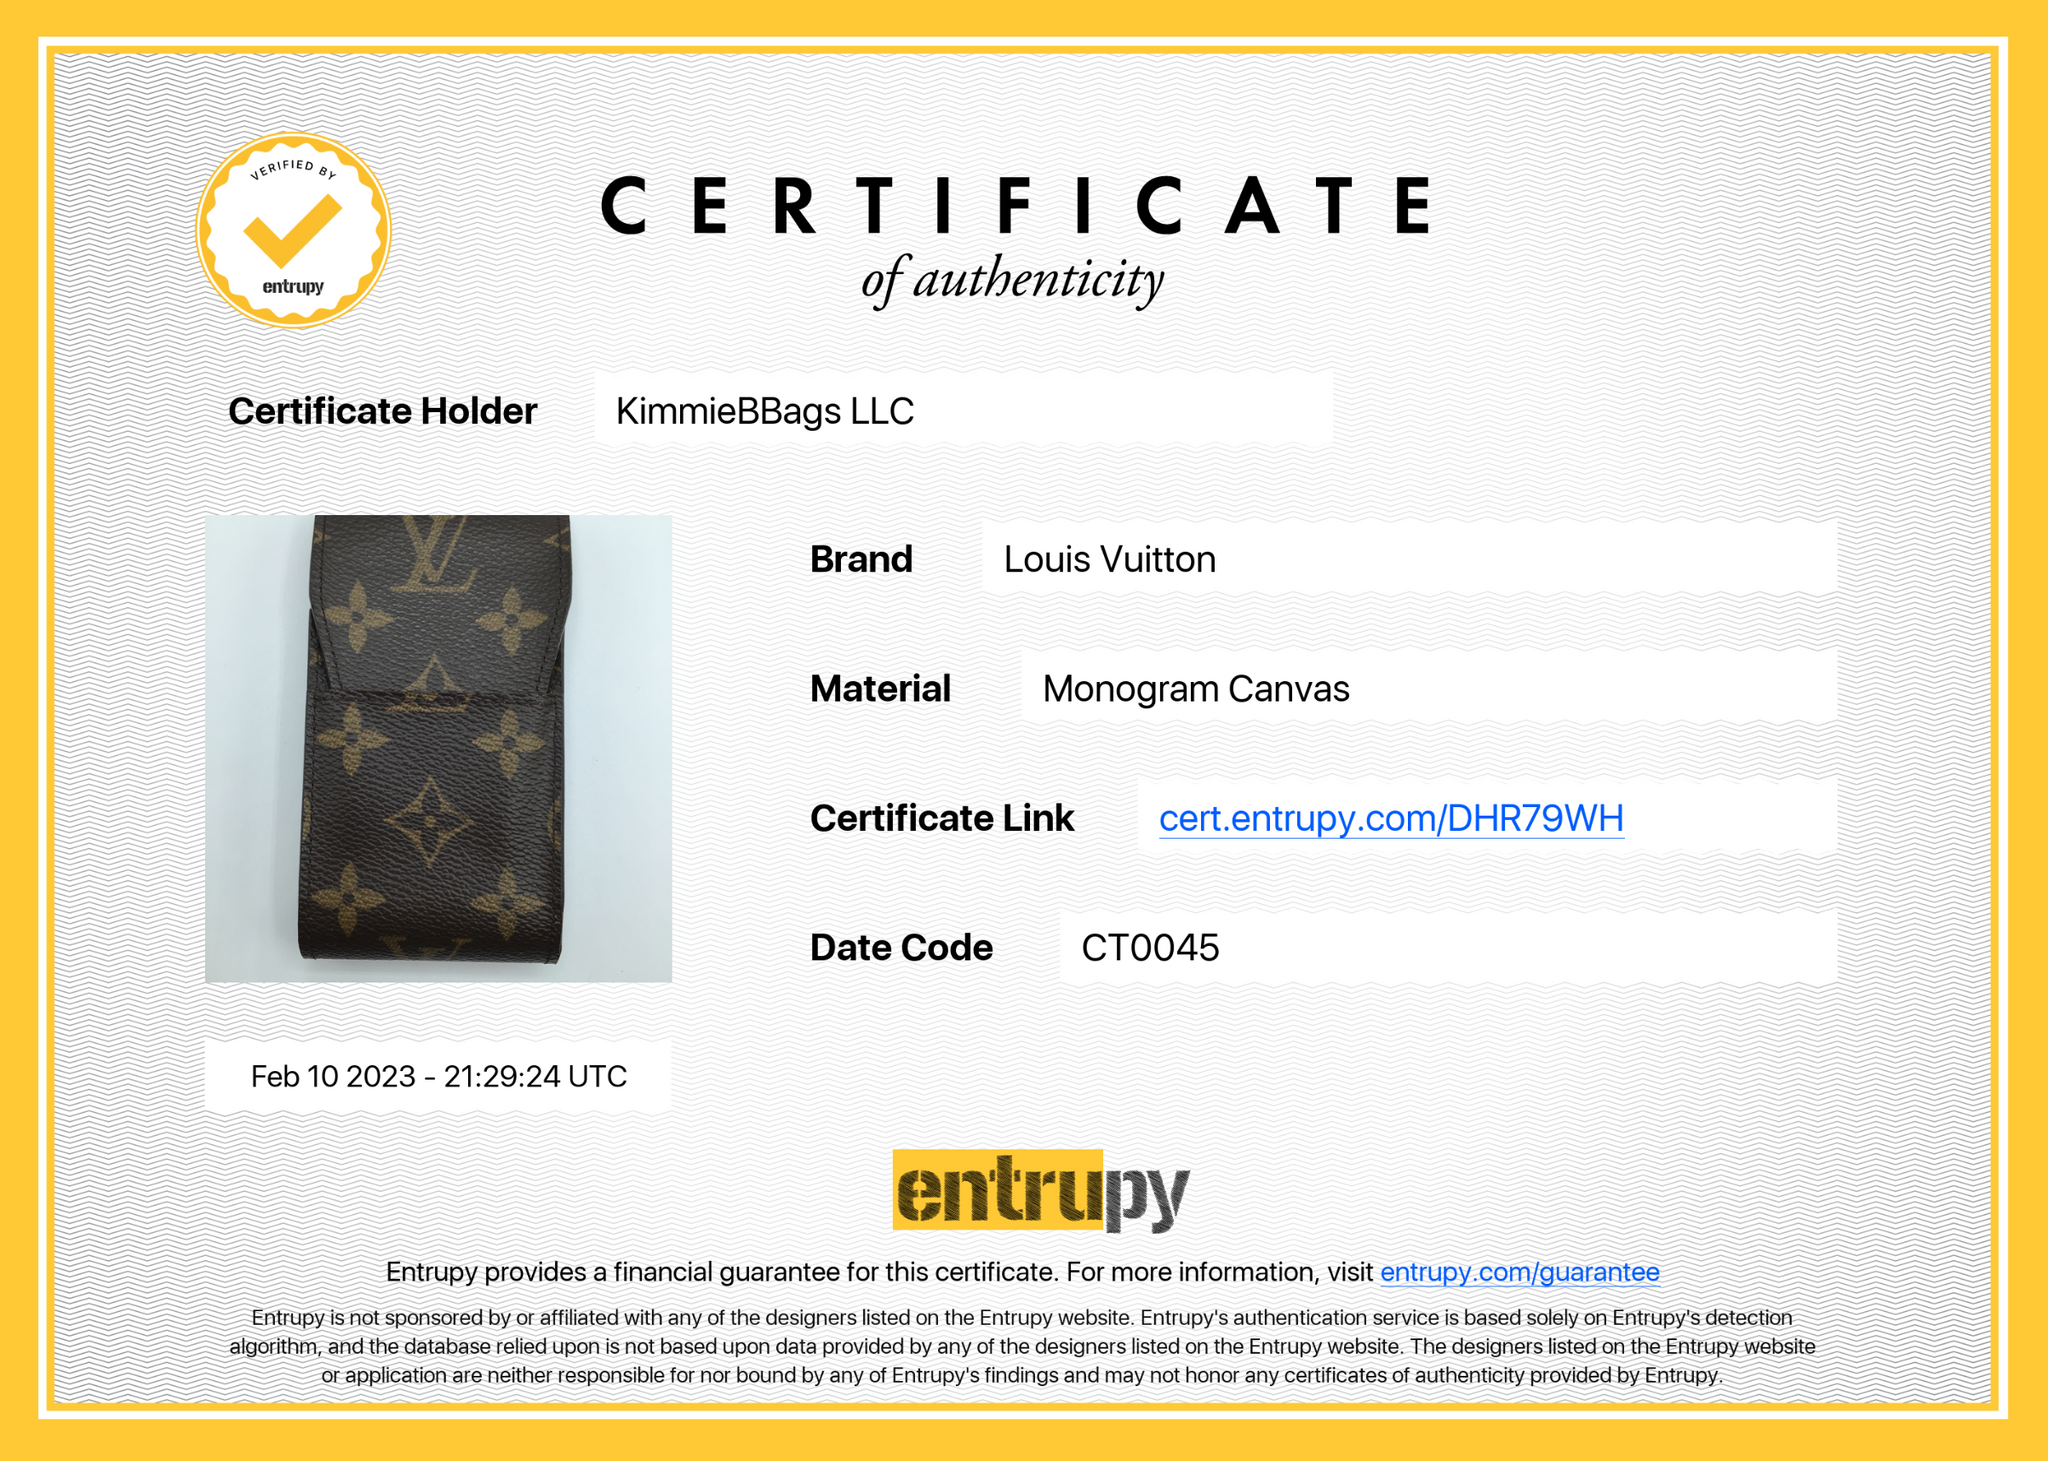 Buy Free Shipping Authentic Pre-owned Louis Vuitton Monogram V